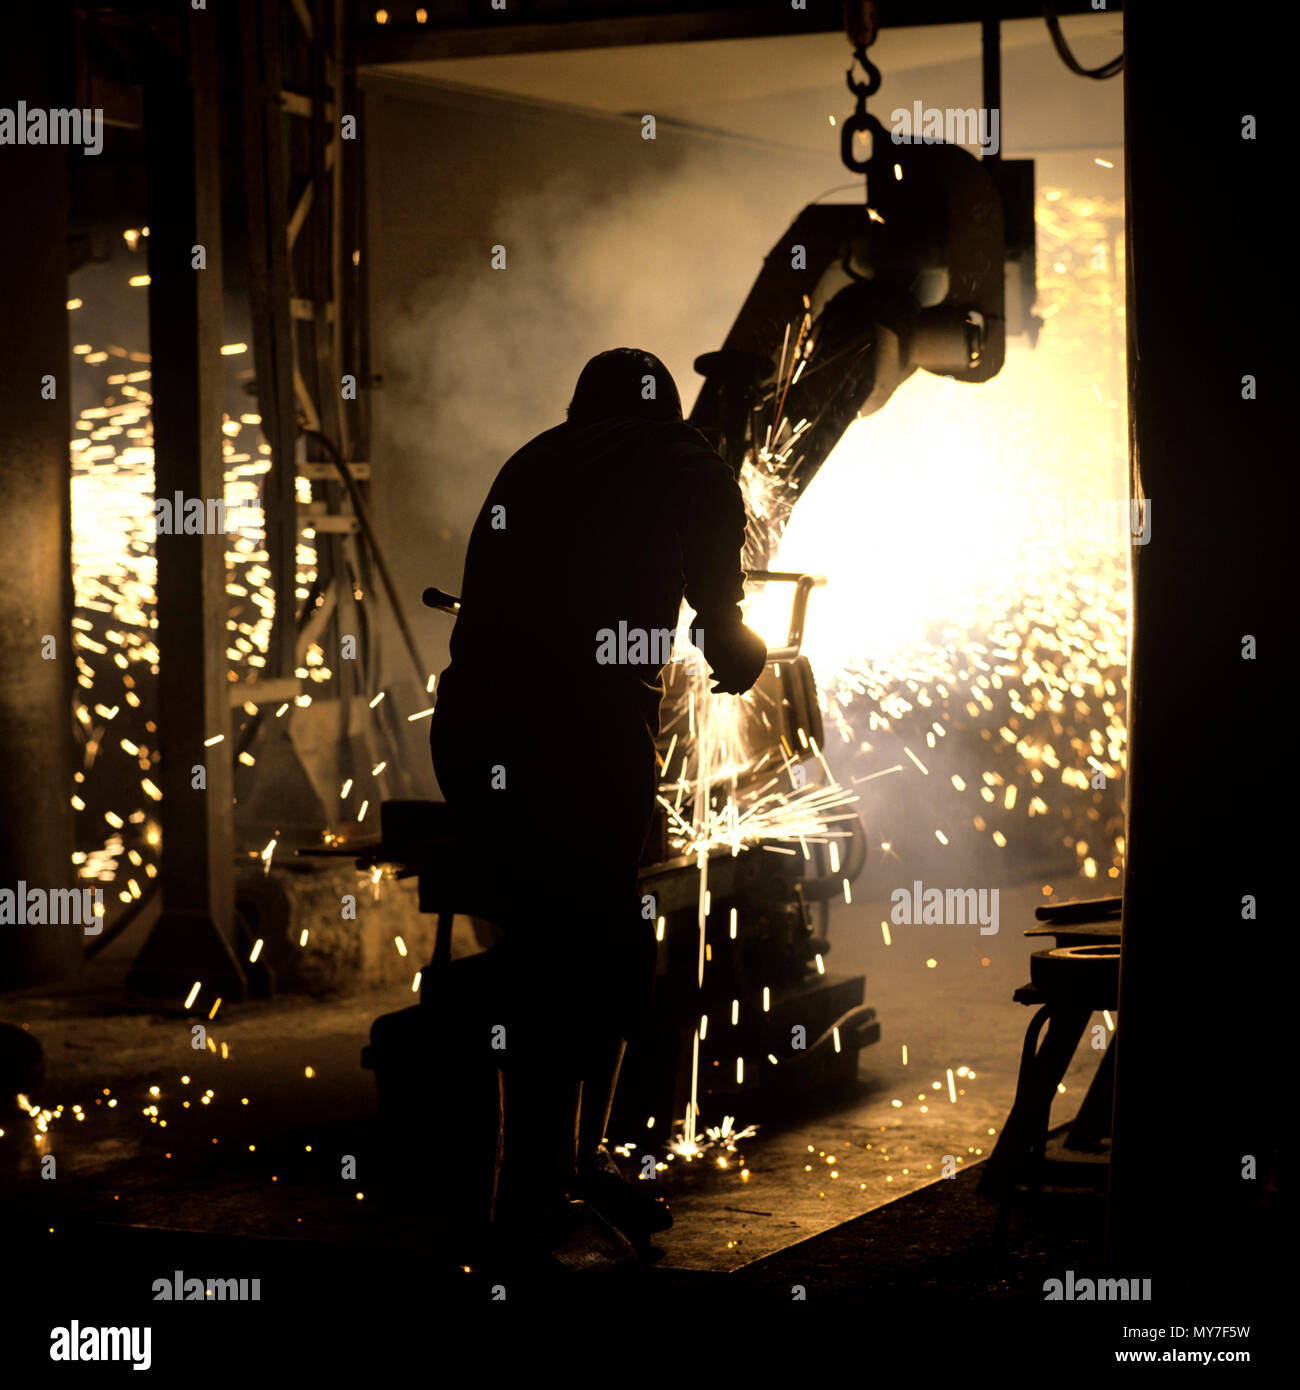 Metal industry, France Stock Photo